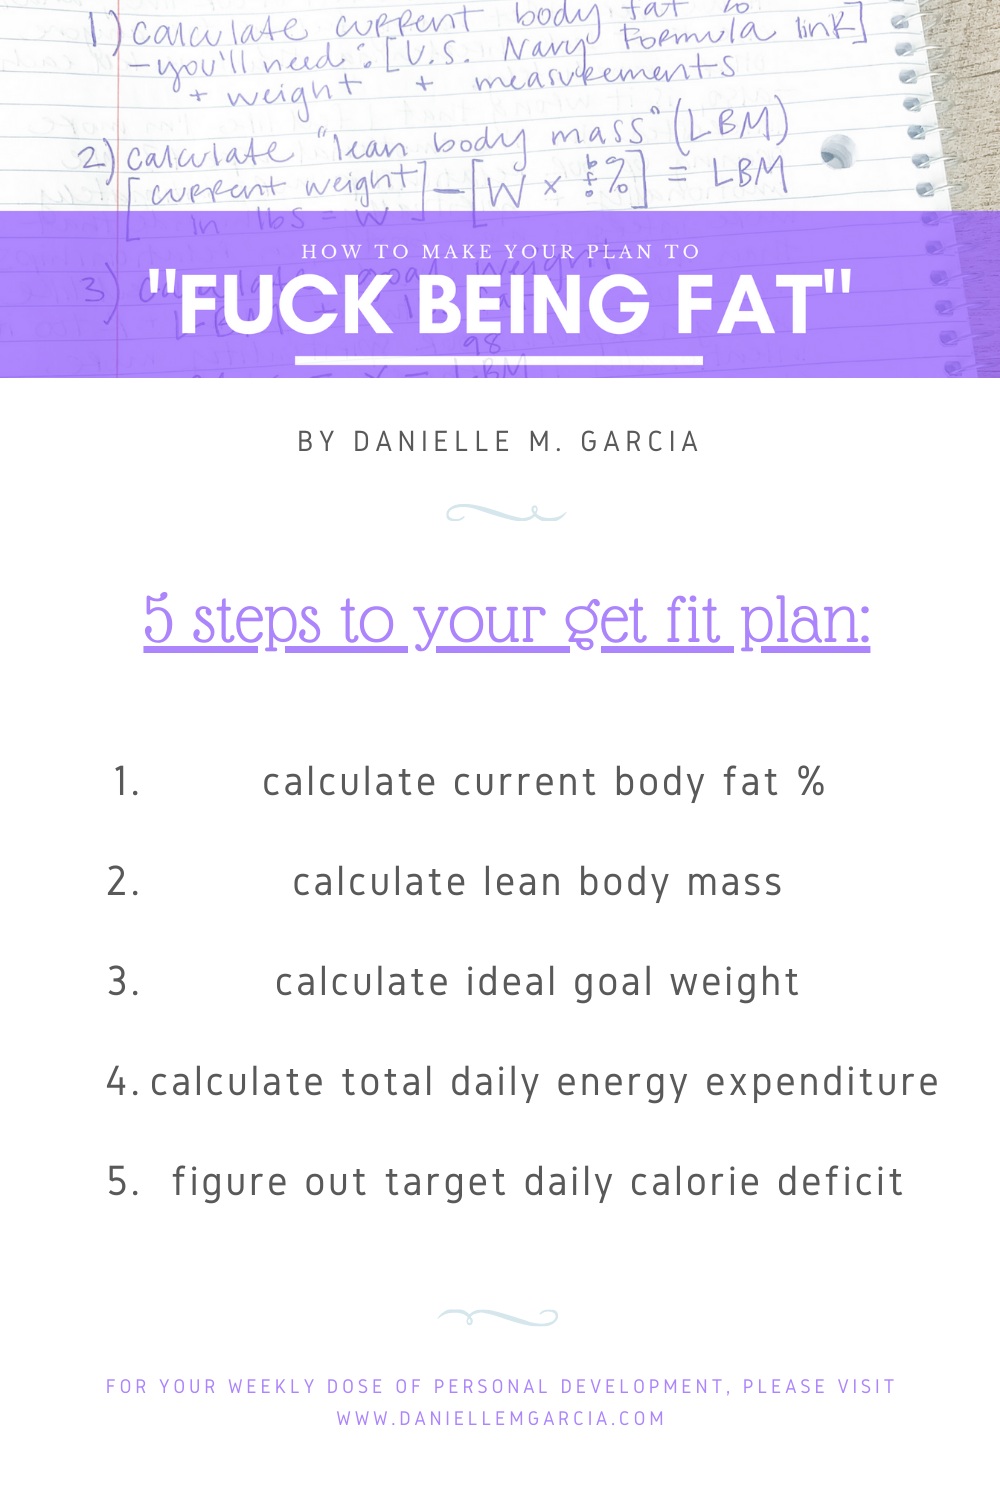 5 steps to making your "fuck being fat" plan